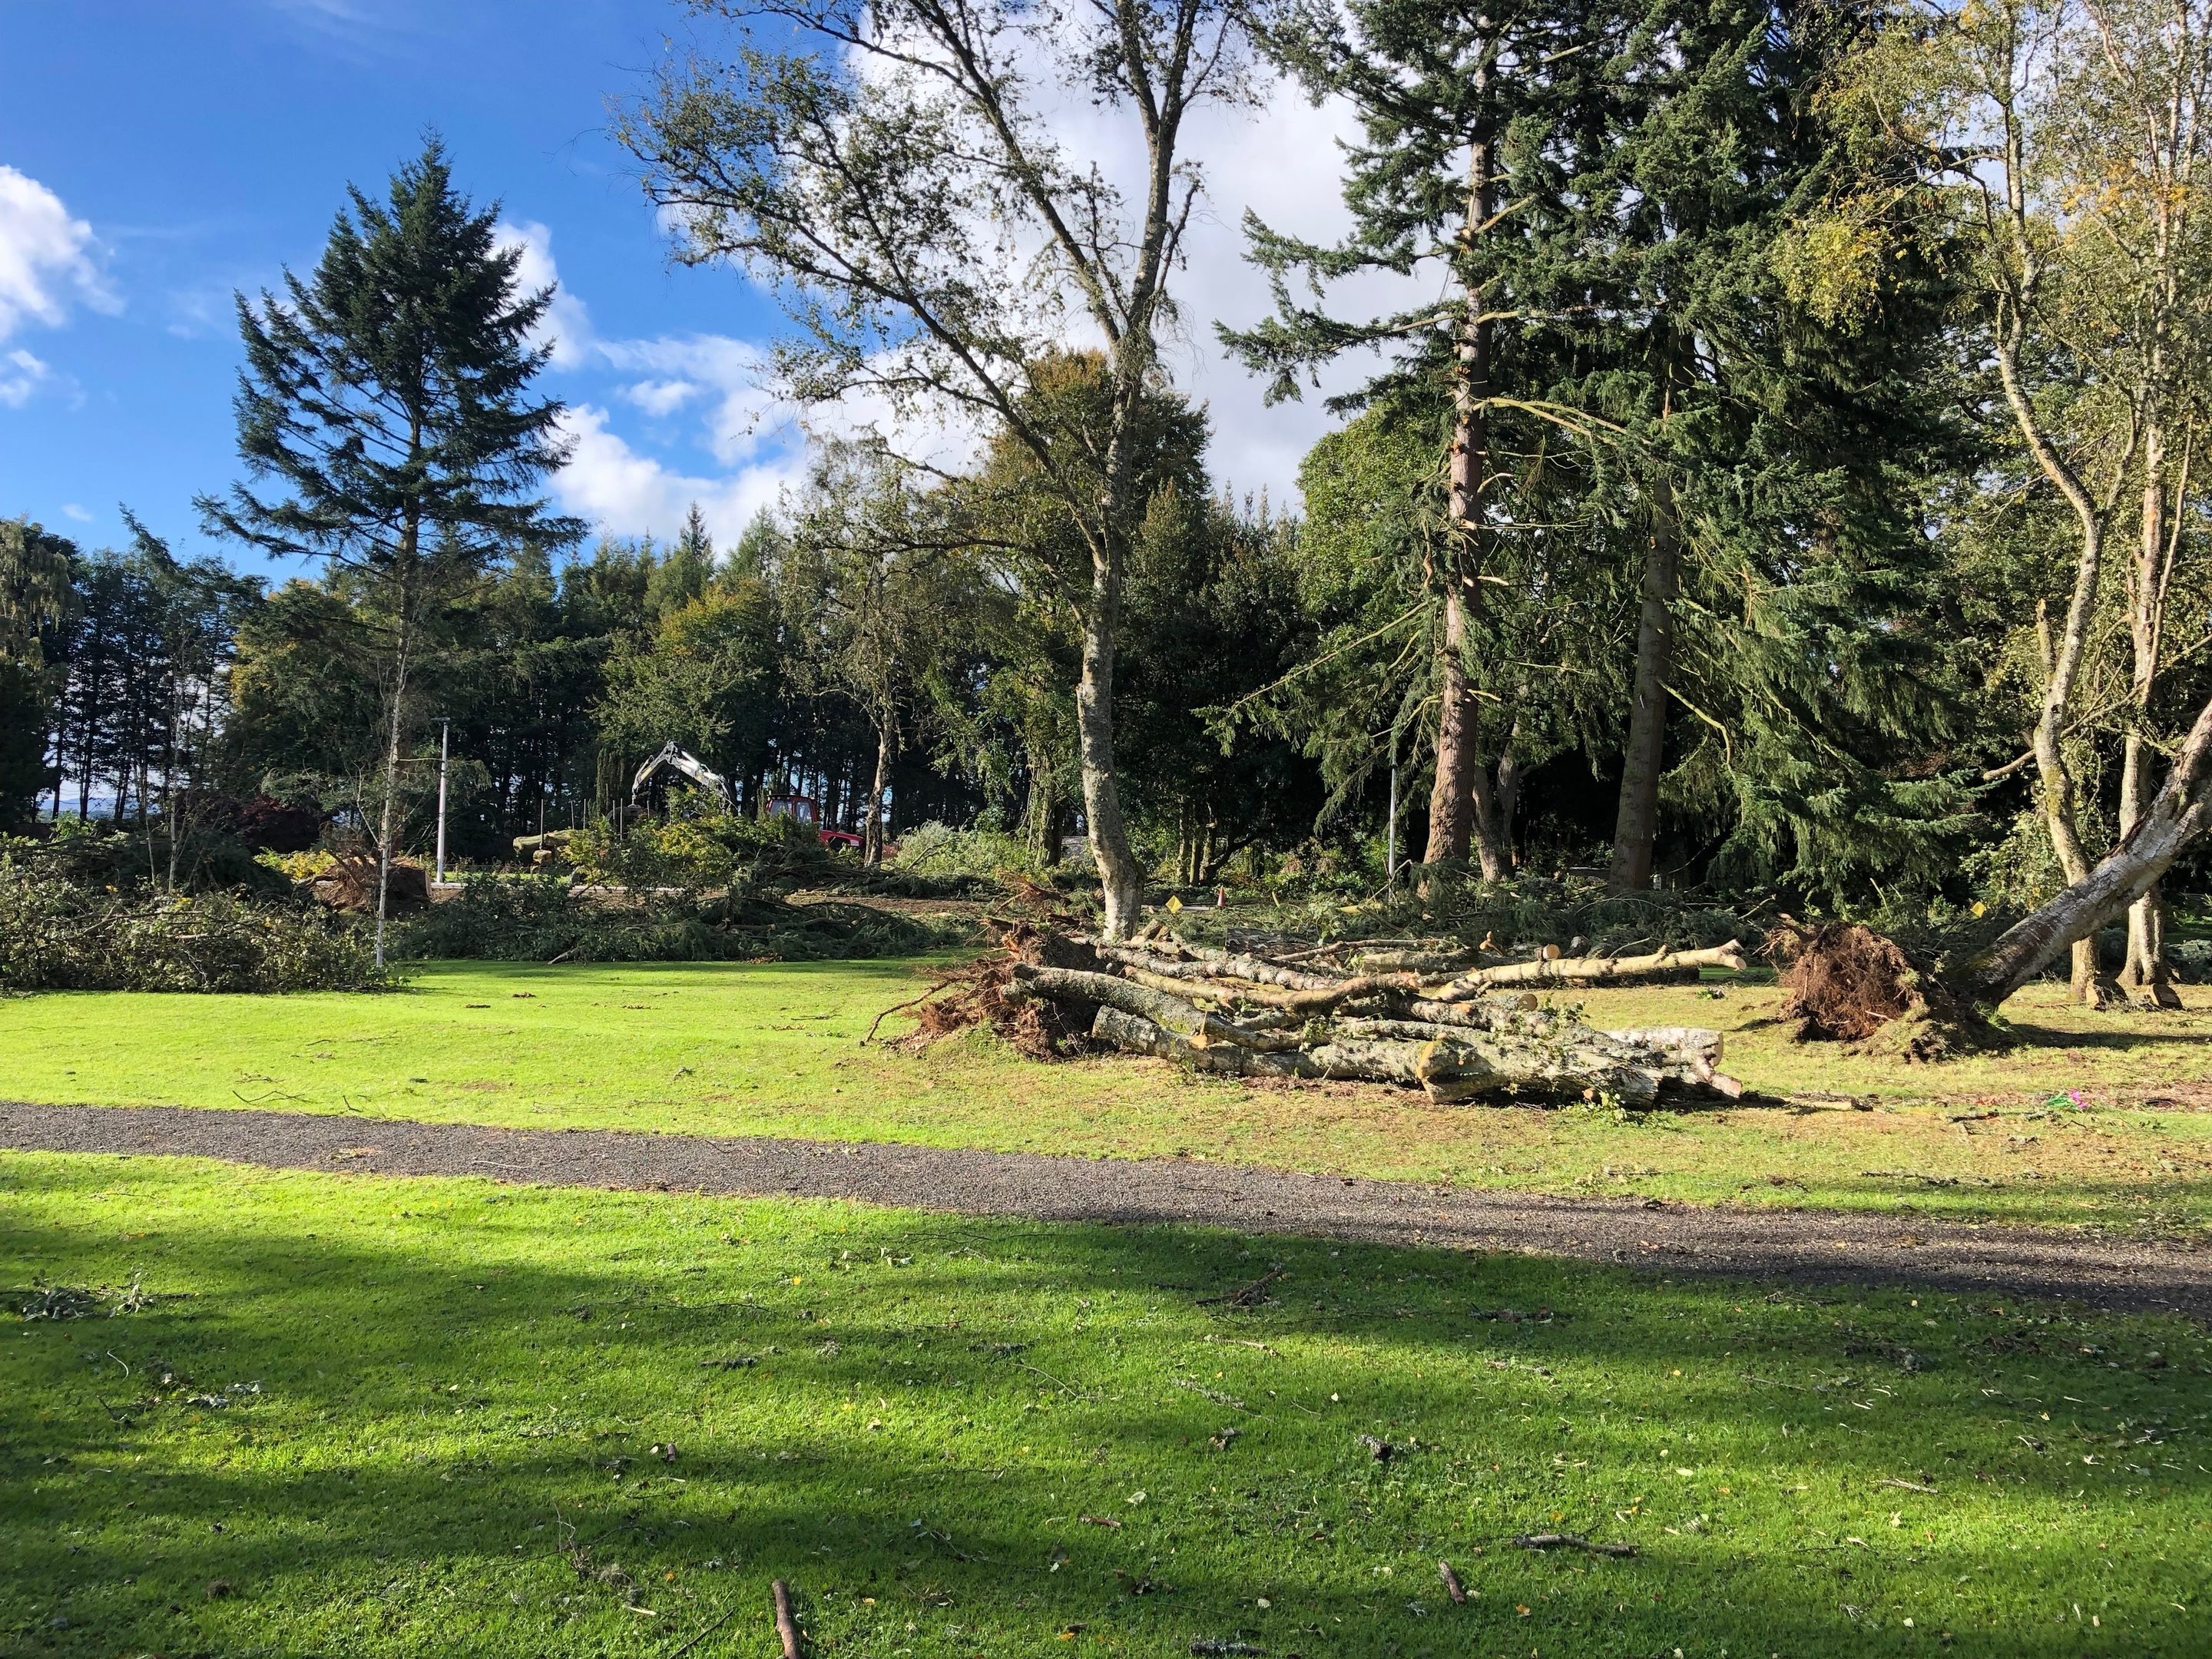 Around 20 trees have been damaged.